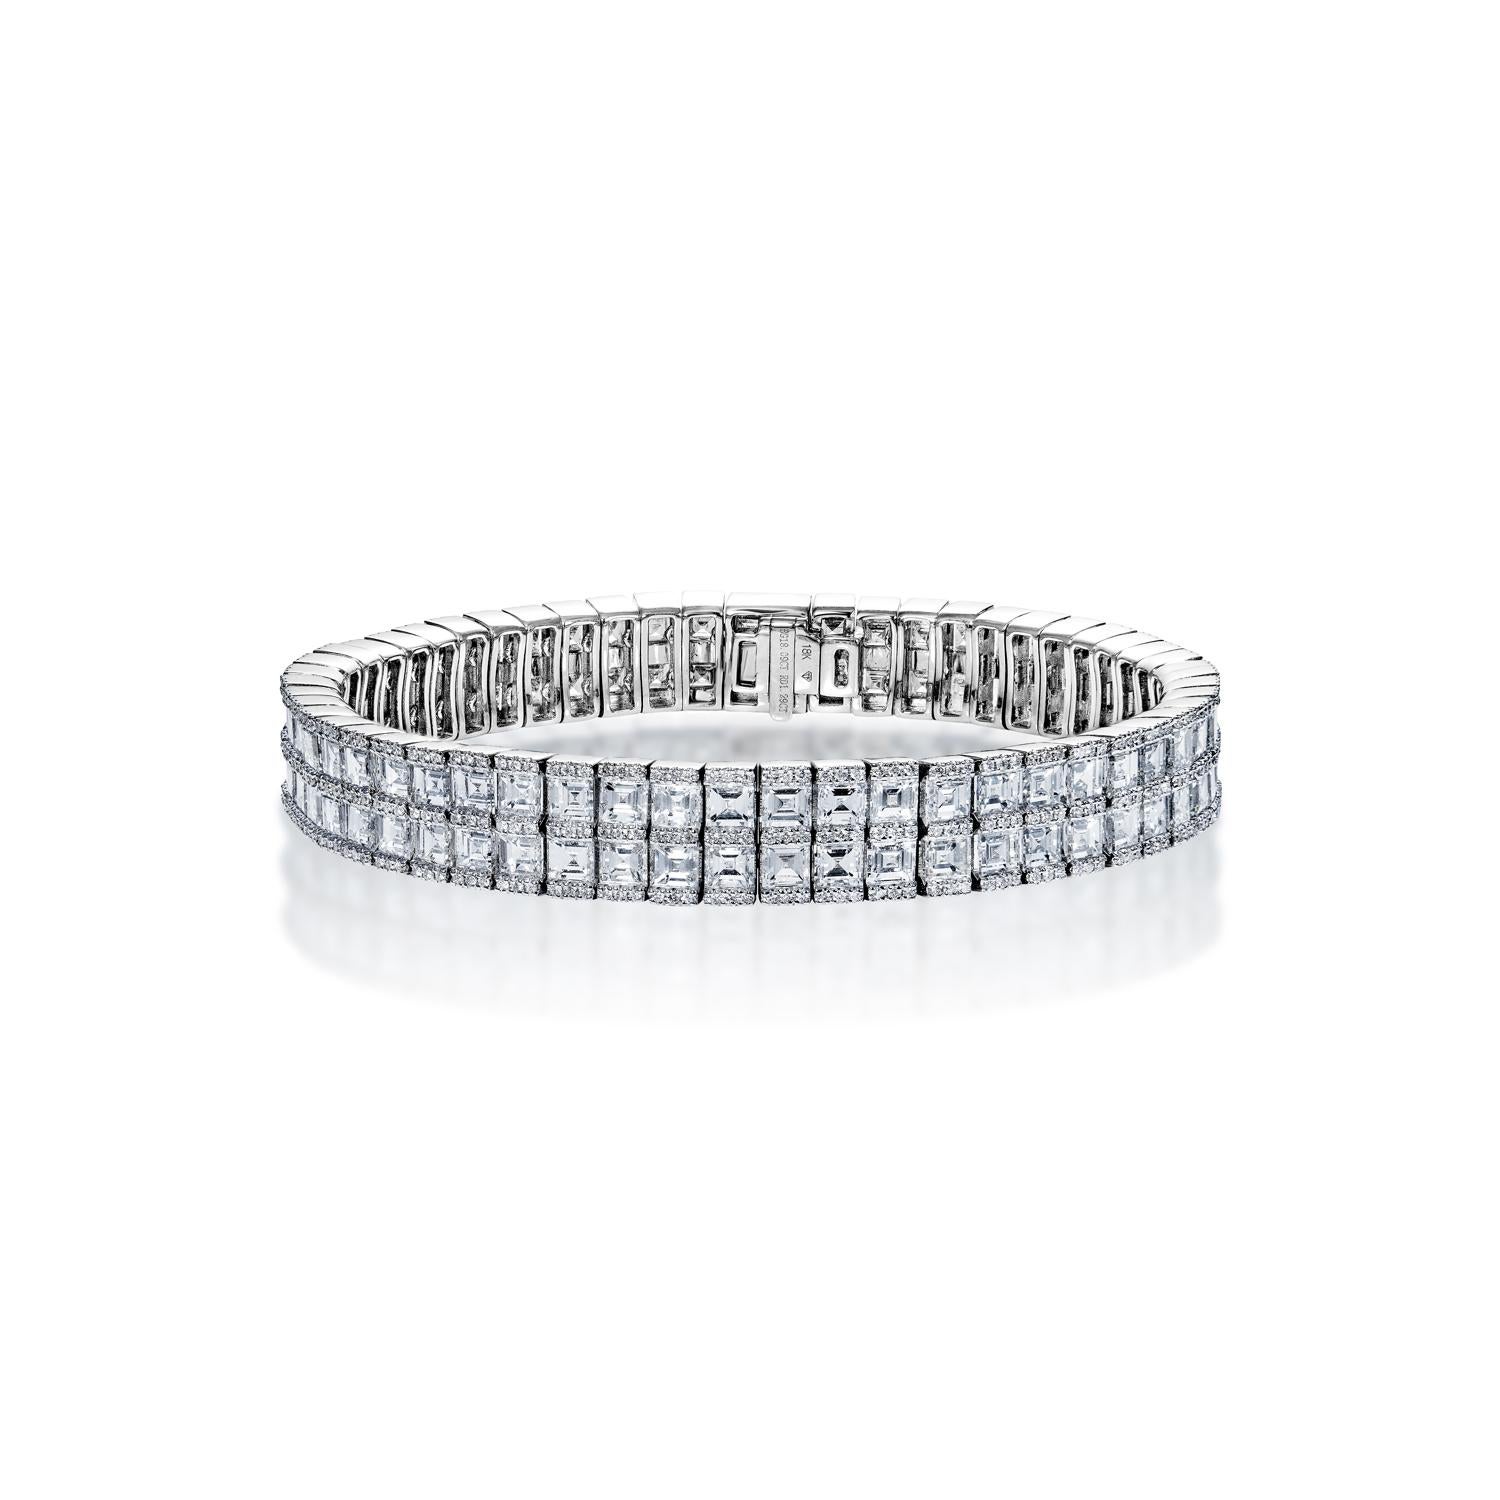 Style: Diamond 2 Row Bracelet
Diamonds
Diamond Size: 19.38 Carats
Diamond Shape: Combine Mixed Shape


Setting: Miracle Set
Metal: 18K White Gold
Metal Weight: 31.97 Grams
Clasp: Box catch with hidden safety

Total Carat Weight: 19.38 Carats